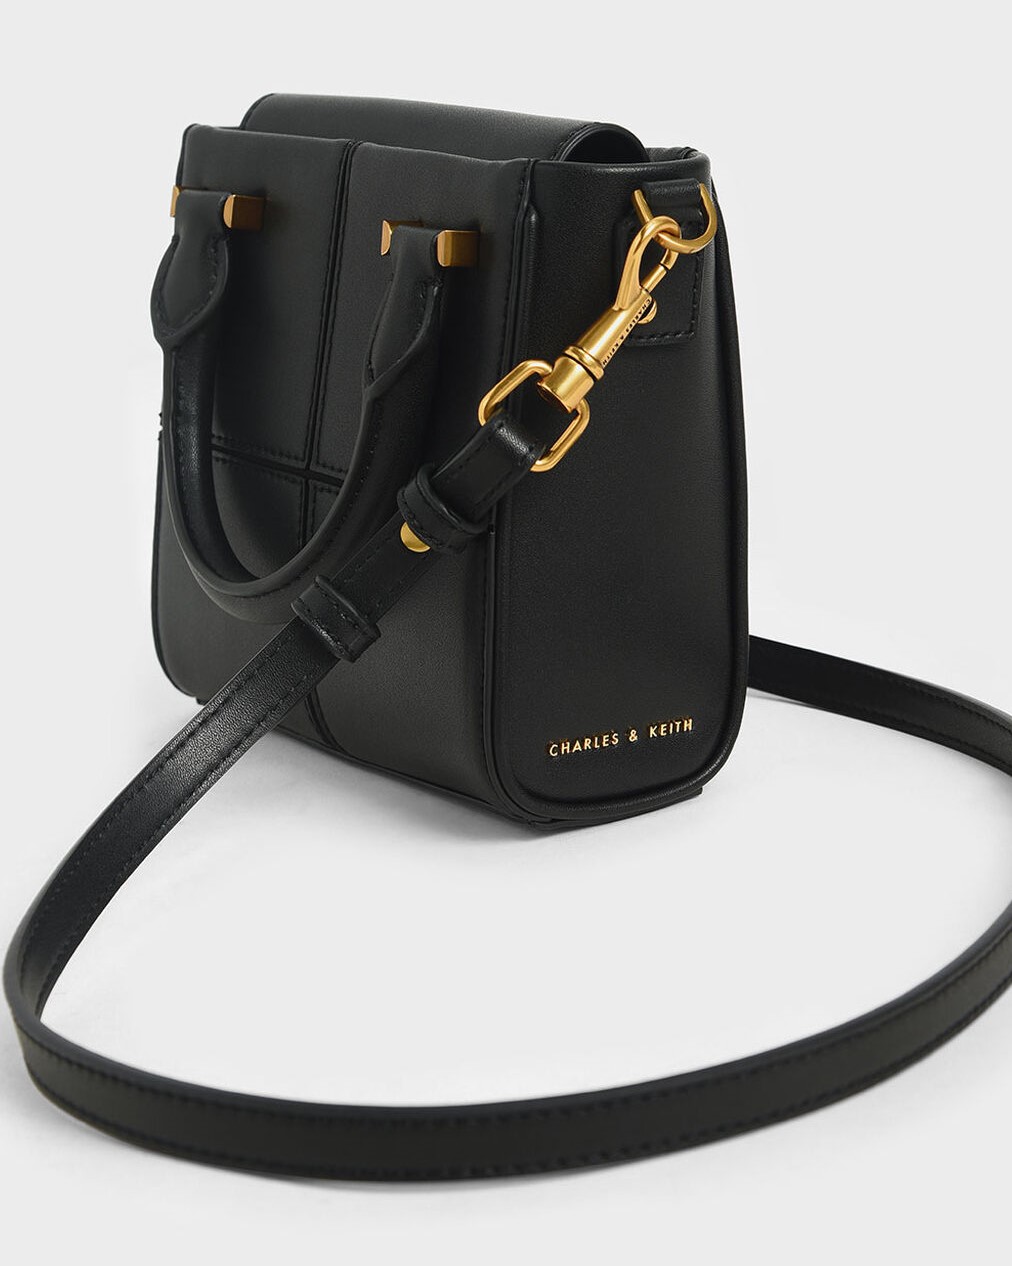 TÚI XÁCH NỮ CHARLES & KEITH TEXTURED PANELLED TOP HANDLE BAG 20